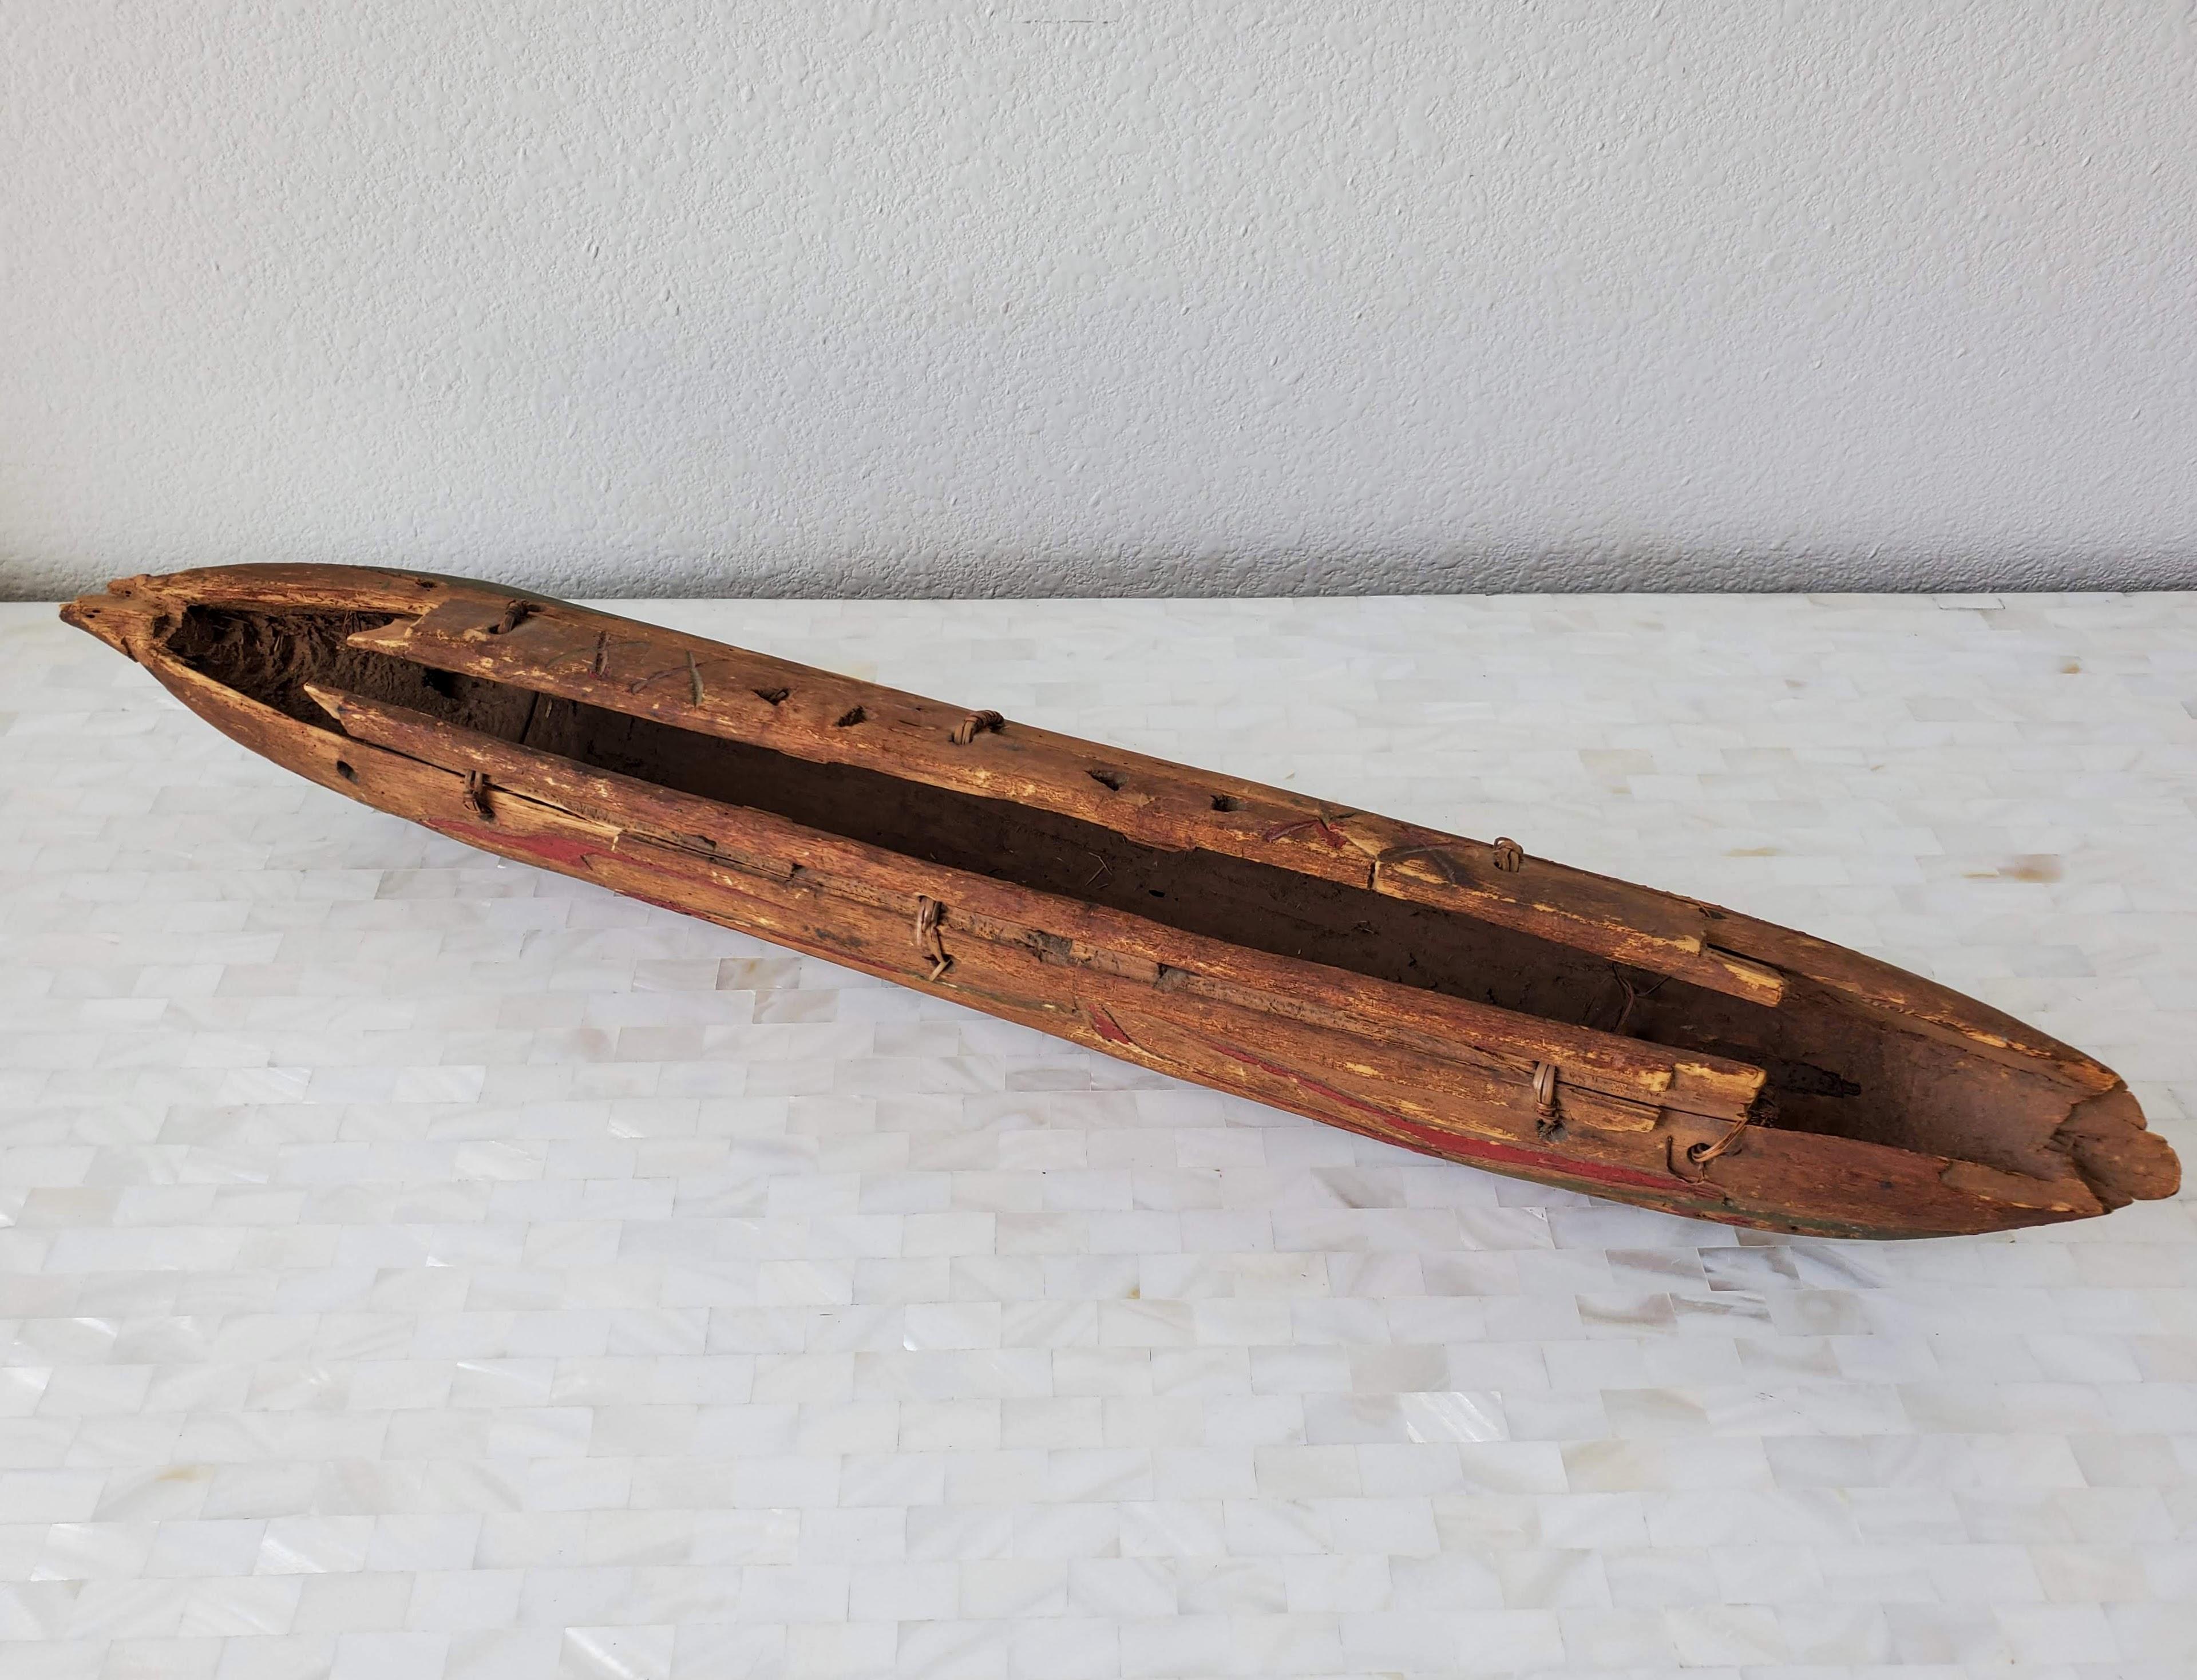 An exceptionally rare antique Native American / Indigenous Peoples hand carved and painted wooden dugout canoe model, dating to the early 20th century or earlier, likely Pacific Northwest. 

The hand-crafted miniature scale rendering having an